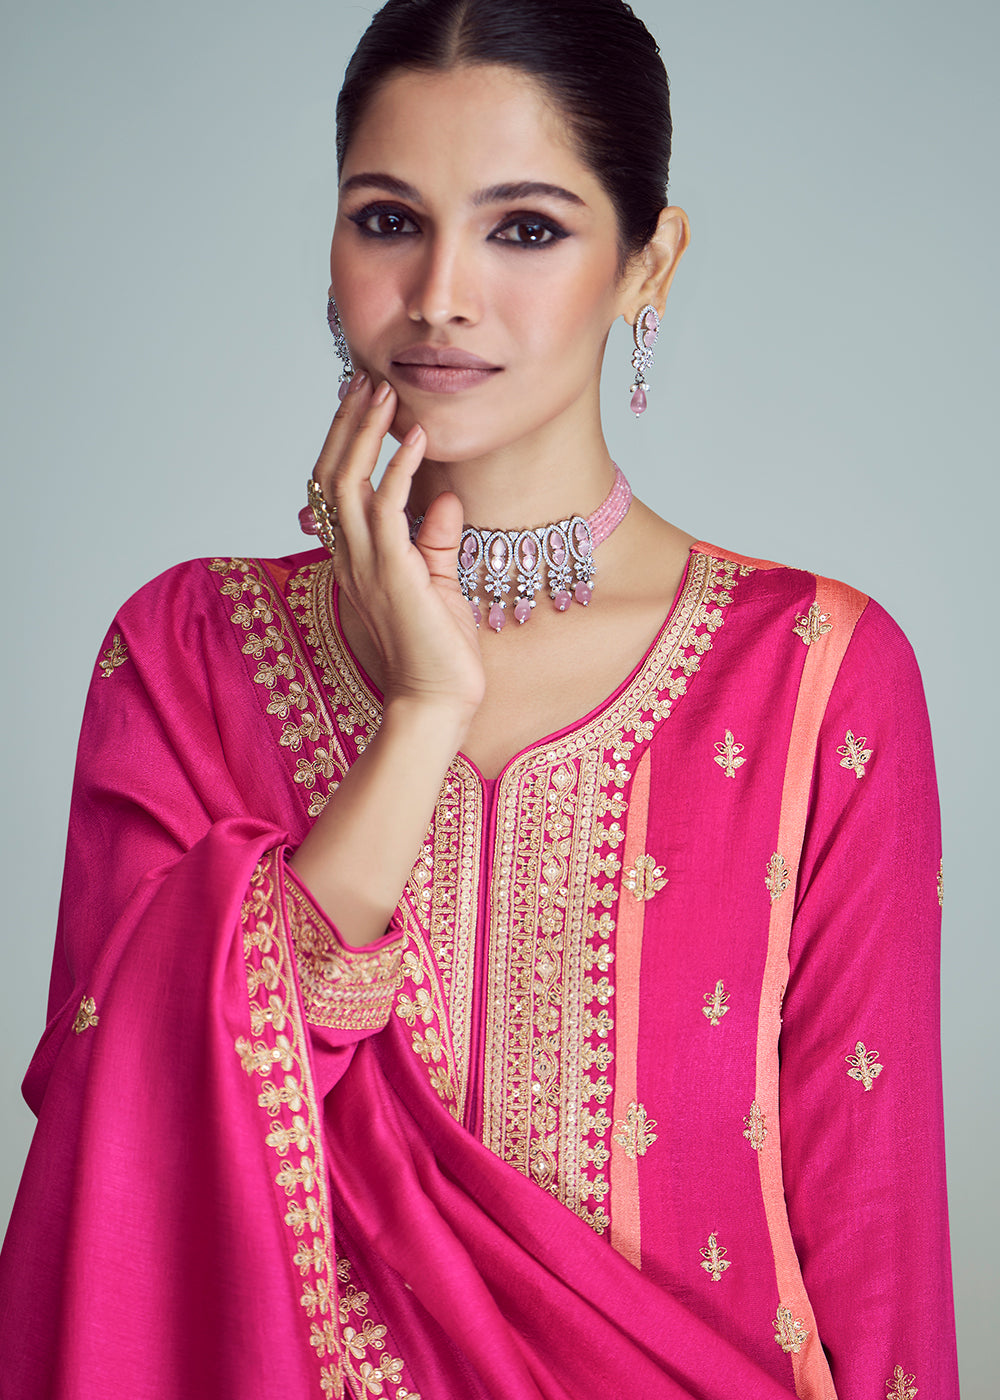 Buy Now Pink & Peach Silk Embroidered Peplum Punjabi Style Suit Online in USA, UK, Canada, Germany, Australia & Worldwide at Empress Clothing.